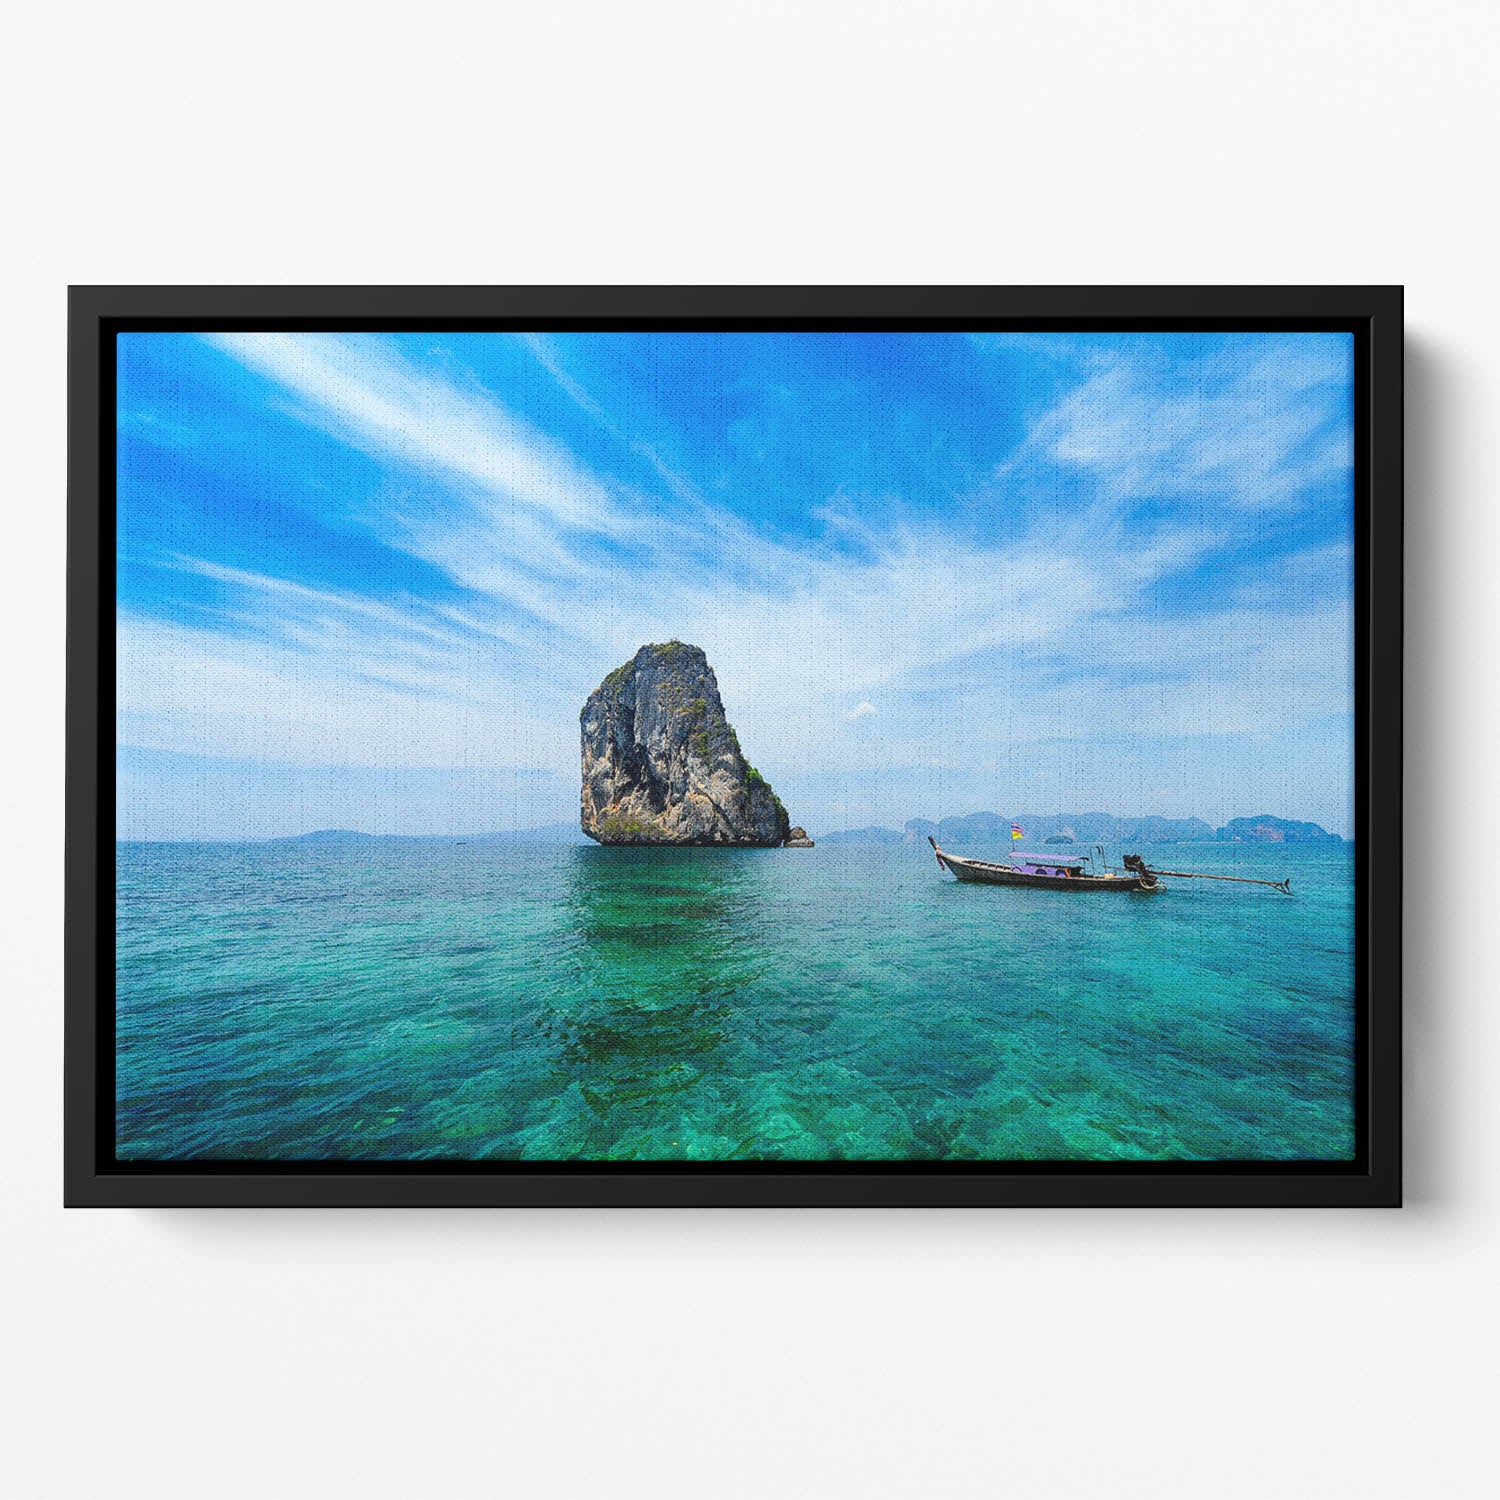 Traditional Thai boat in the blue sea Floating Framed Canvas